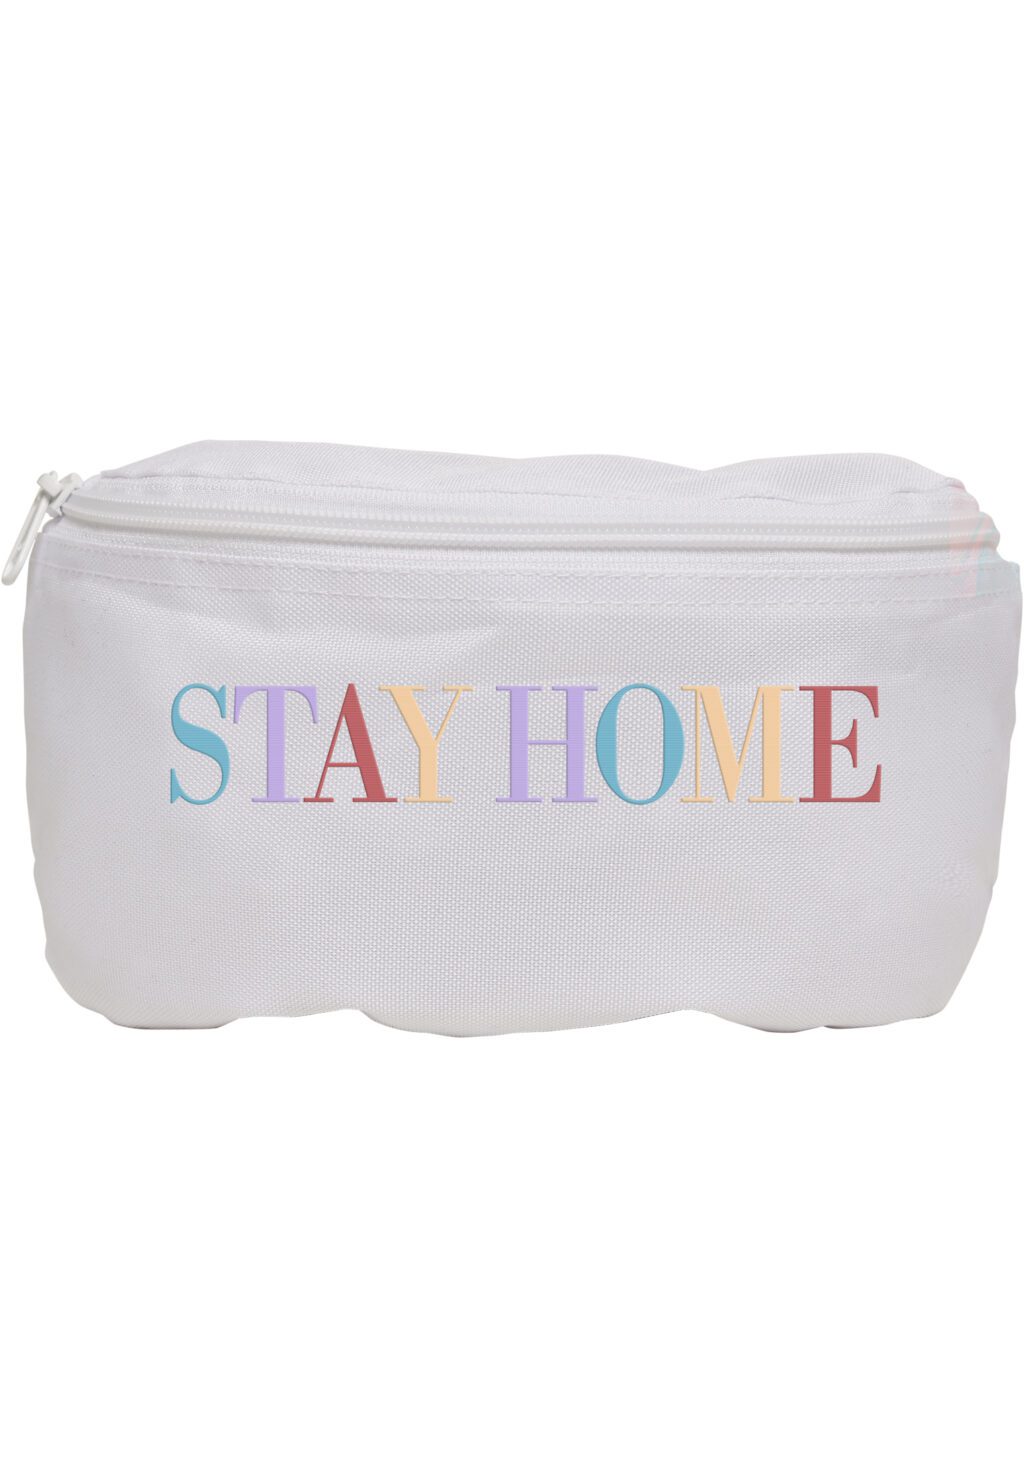 Stay Home Hip Bag white one MT1352